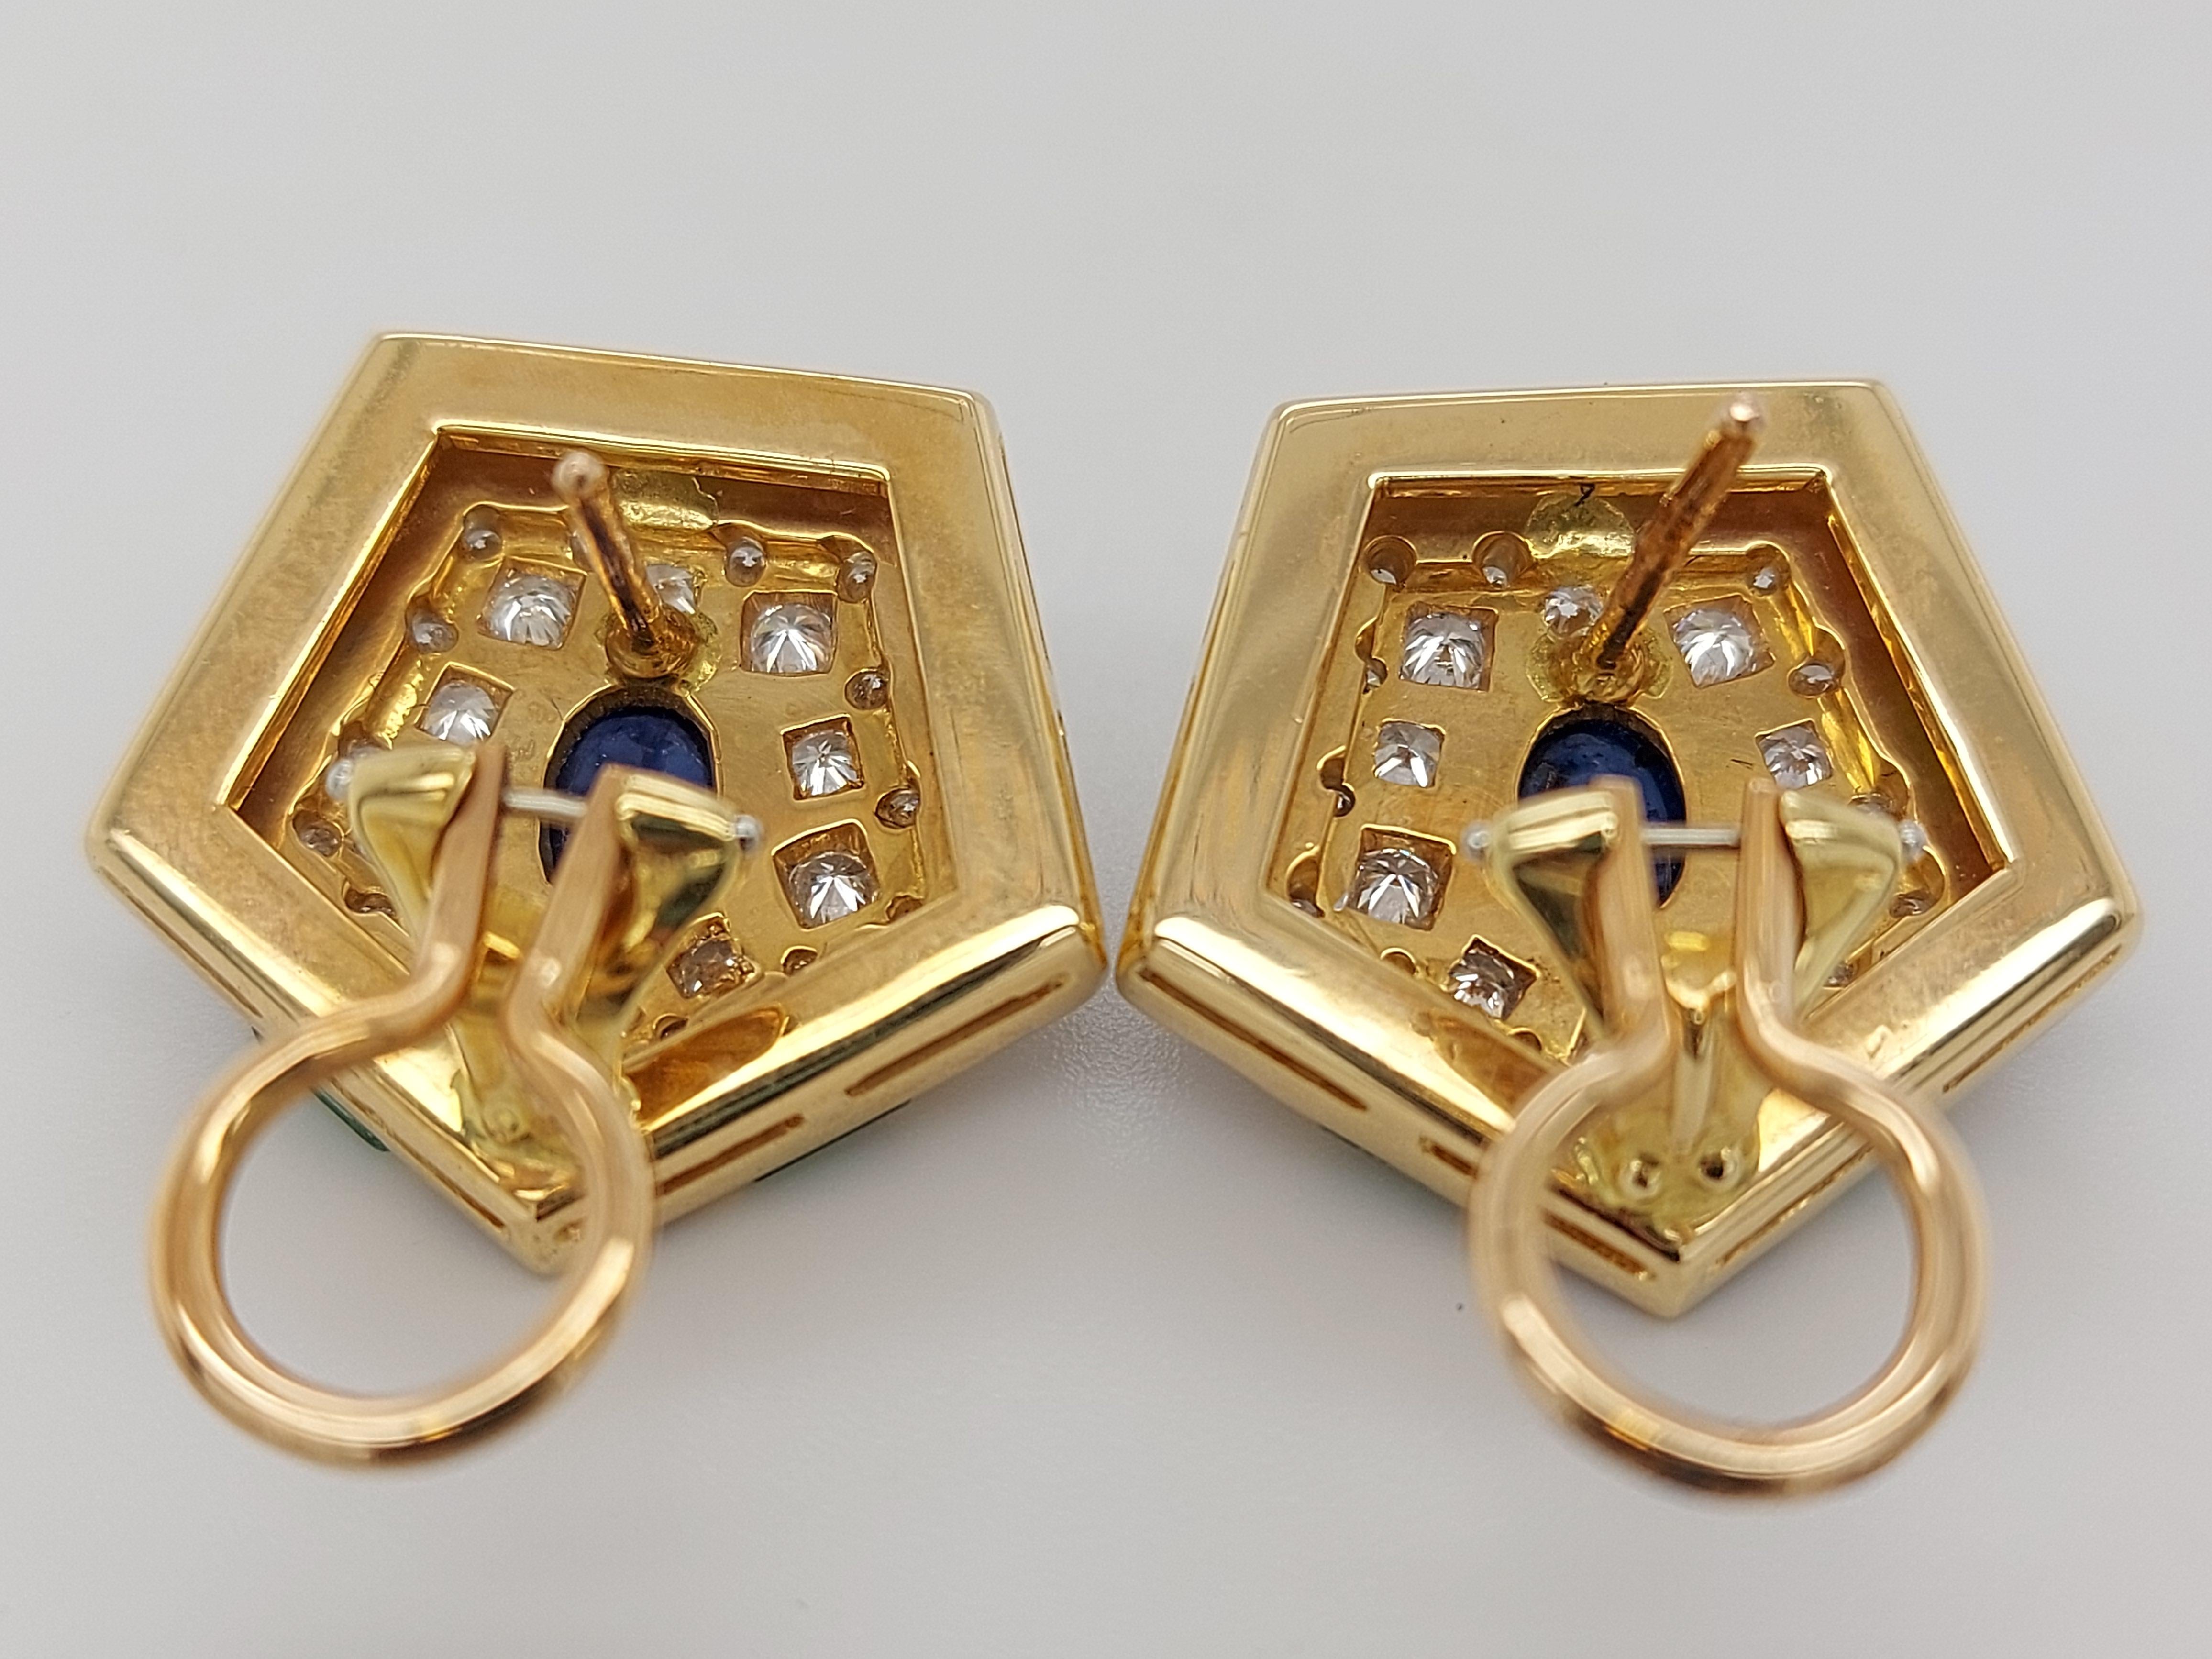 Luxurious Gold Clip-On Earrings With Diamonds, Emerald and Cabochon Sapphire For Sale 9